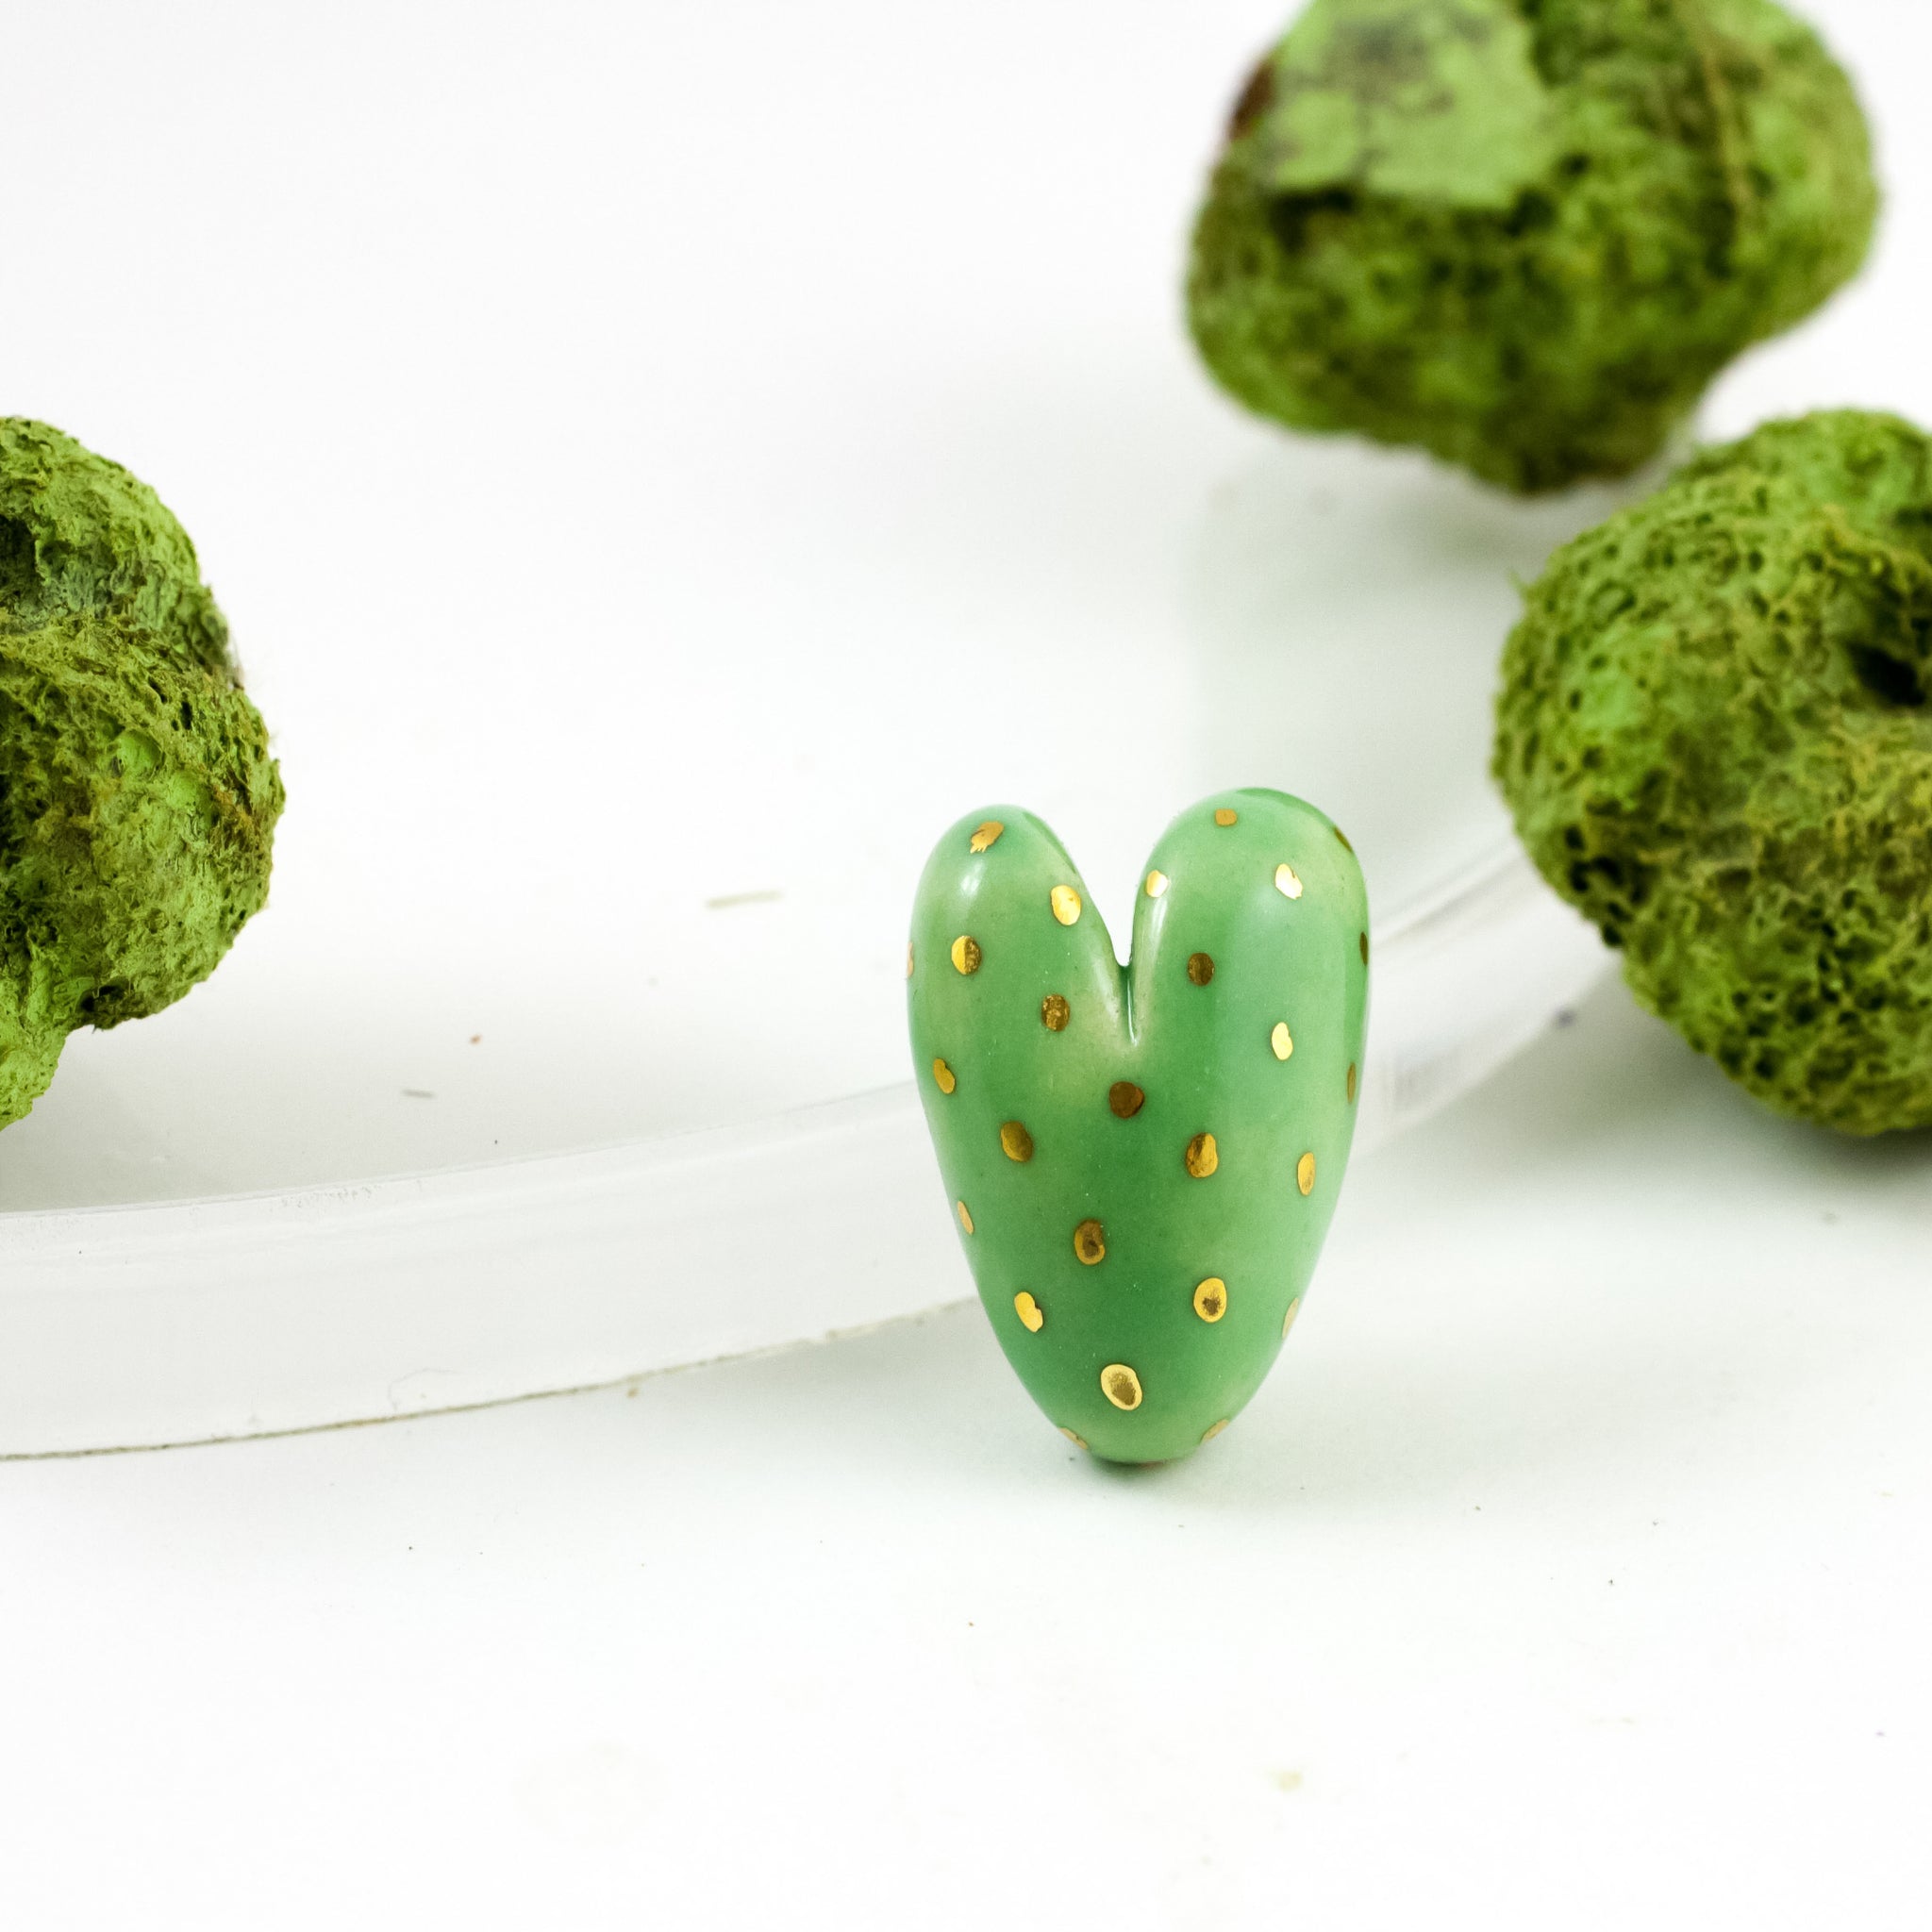 Bright green heart-shaped brooch with gold luster decor